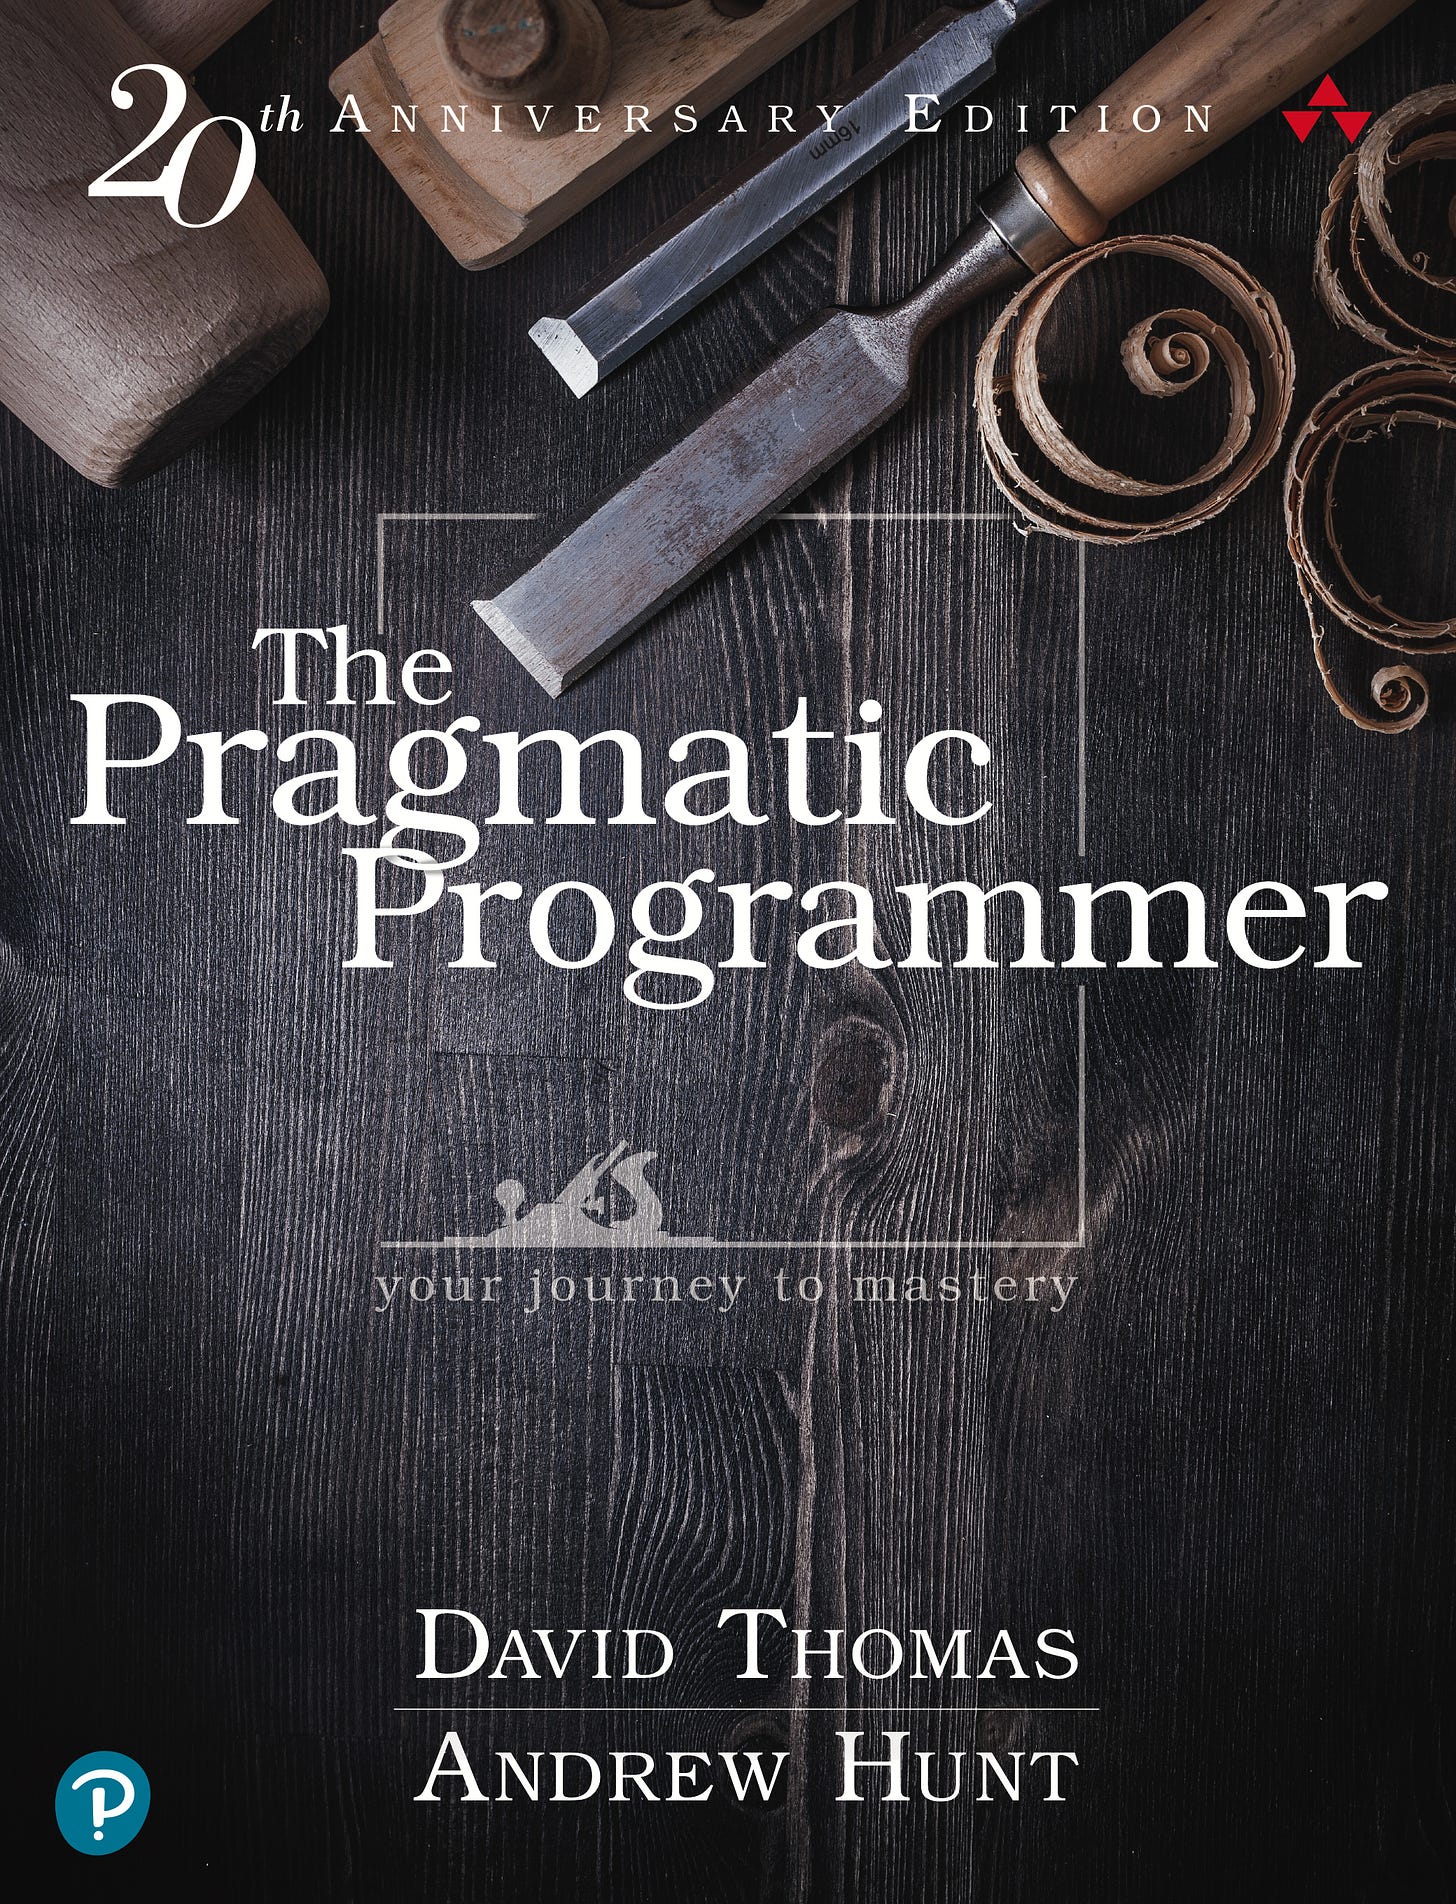 The Pragmatic Programmer, 20th Anniversary Edition: your journey to mastery  by David Thomas, Andrew Hunt